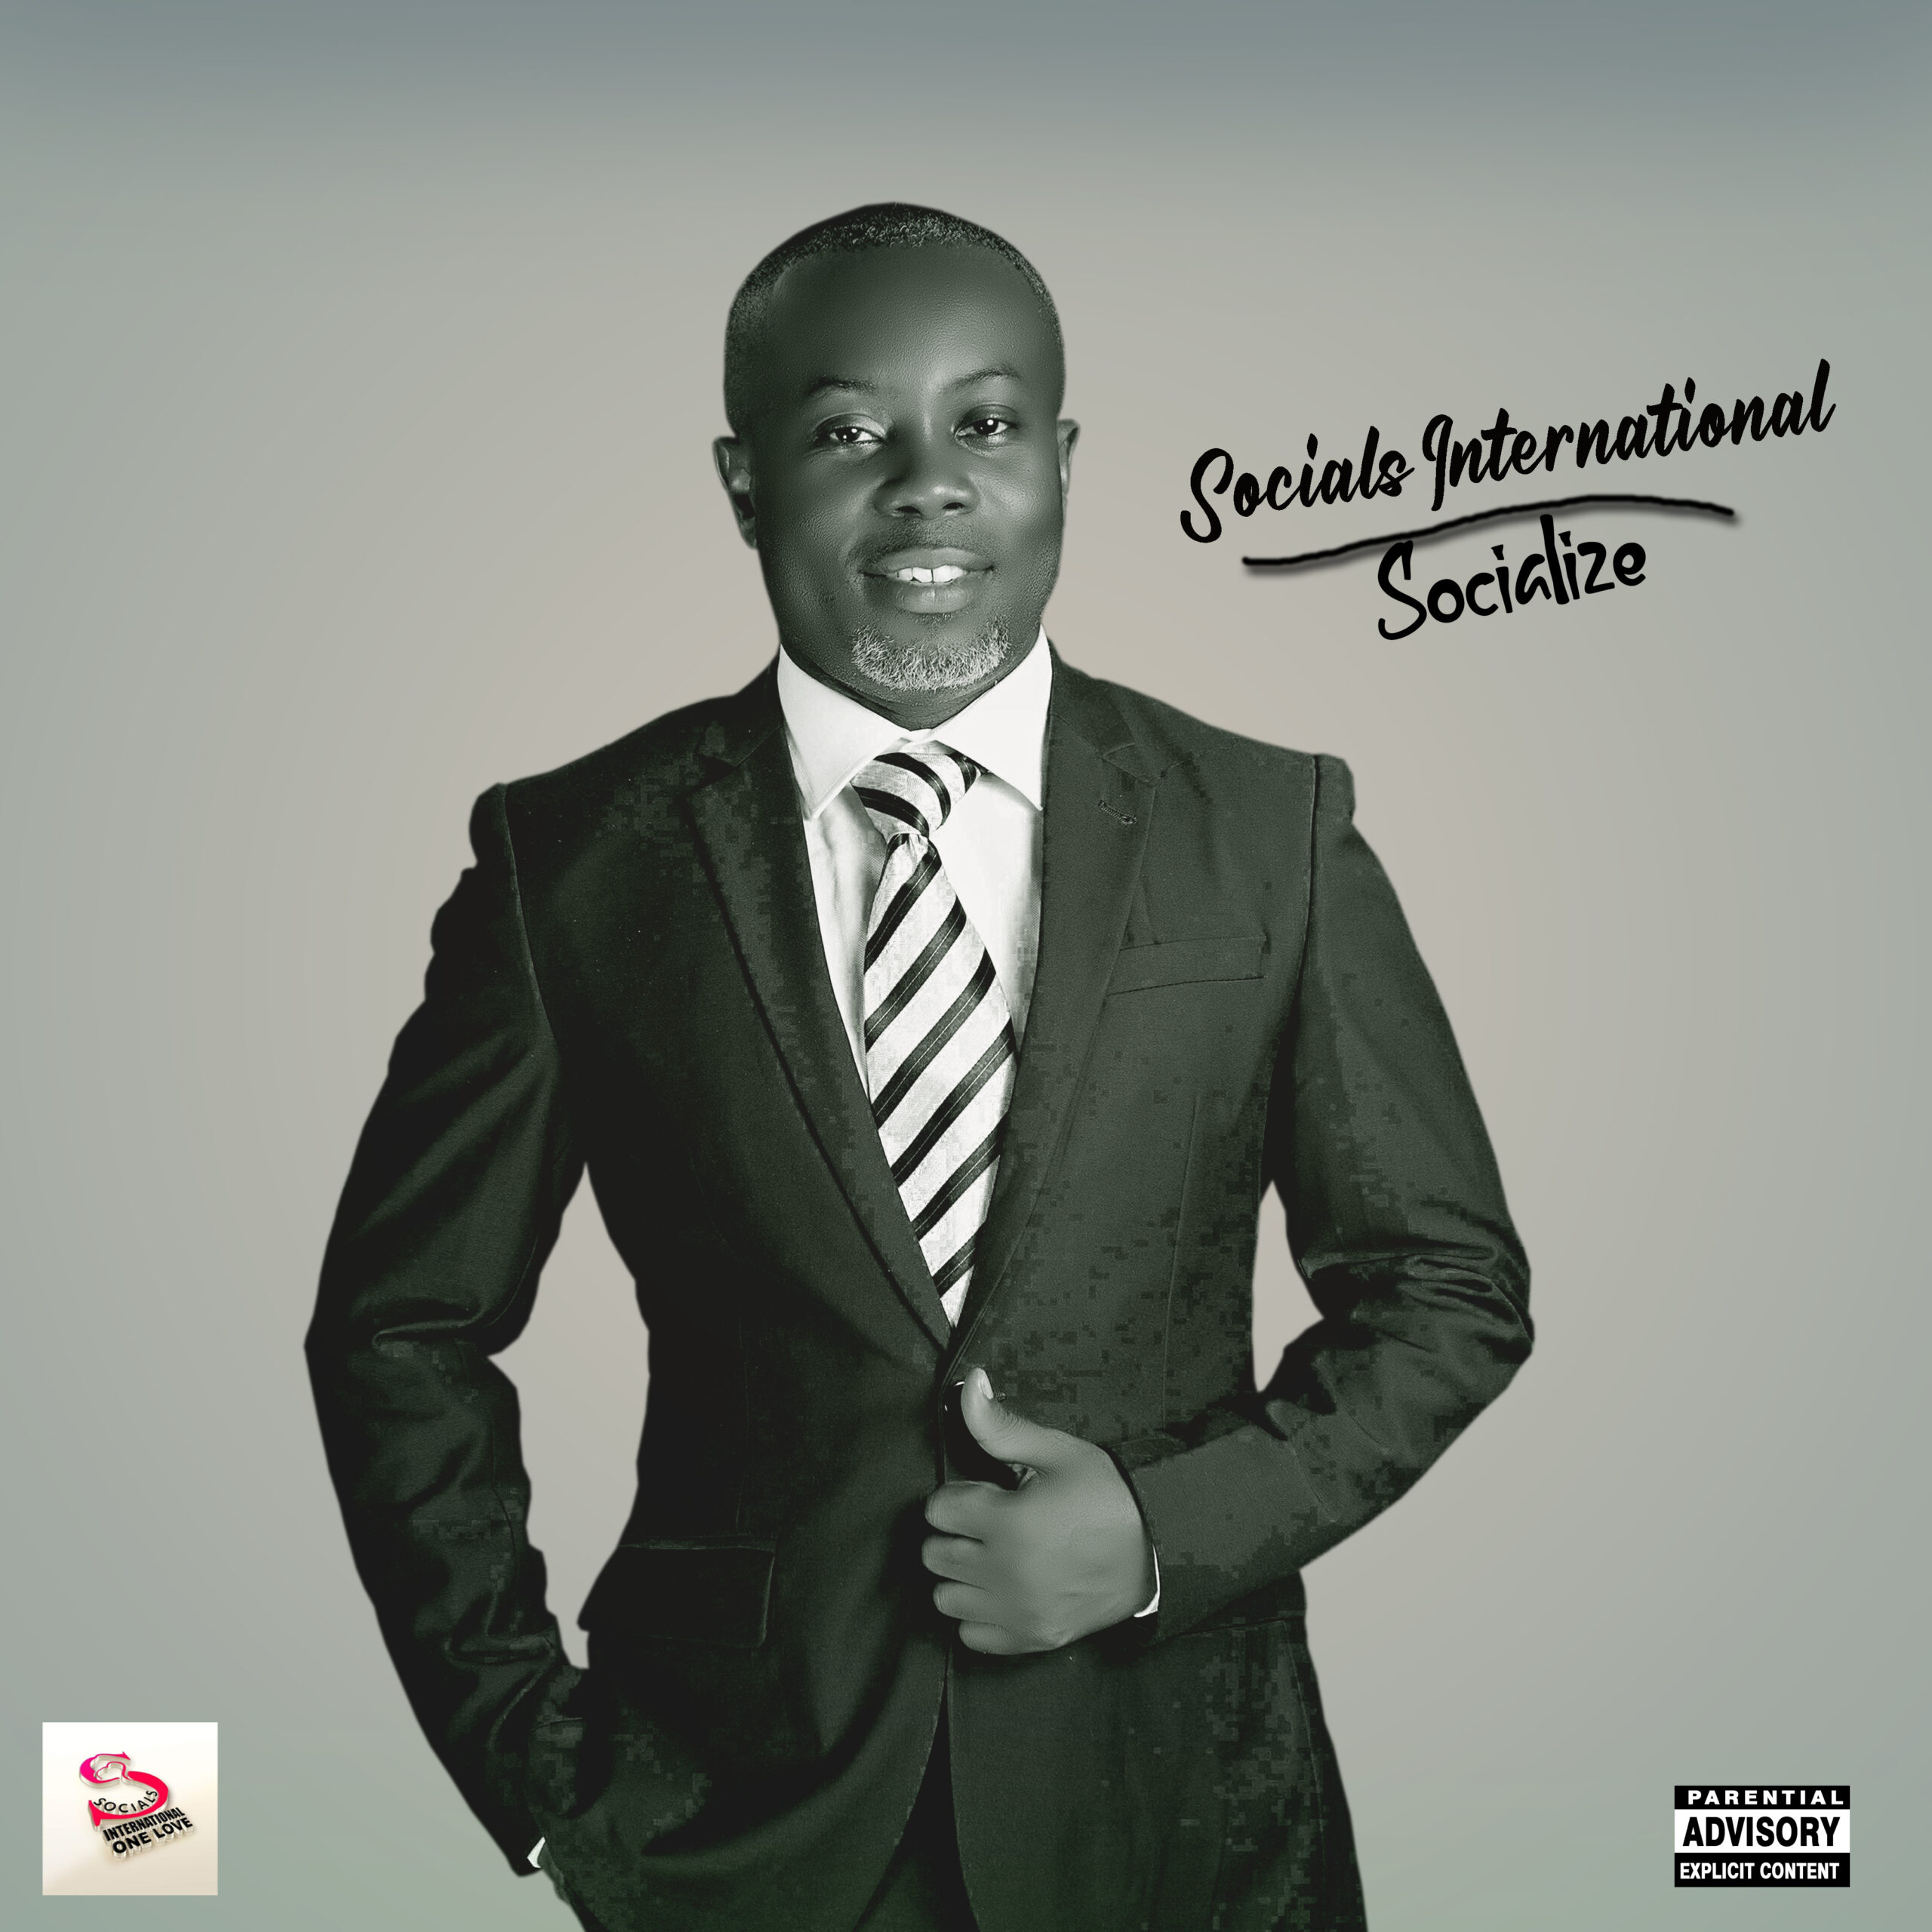 Listen To The New Socials International Album Tagged "SOCIALIZE" featuring Chiff Timz, Yawng Boss, Mas, Quiries, Arite and many more... 25